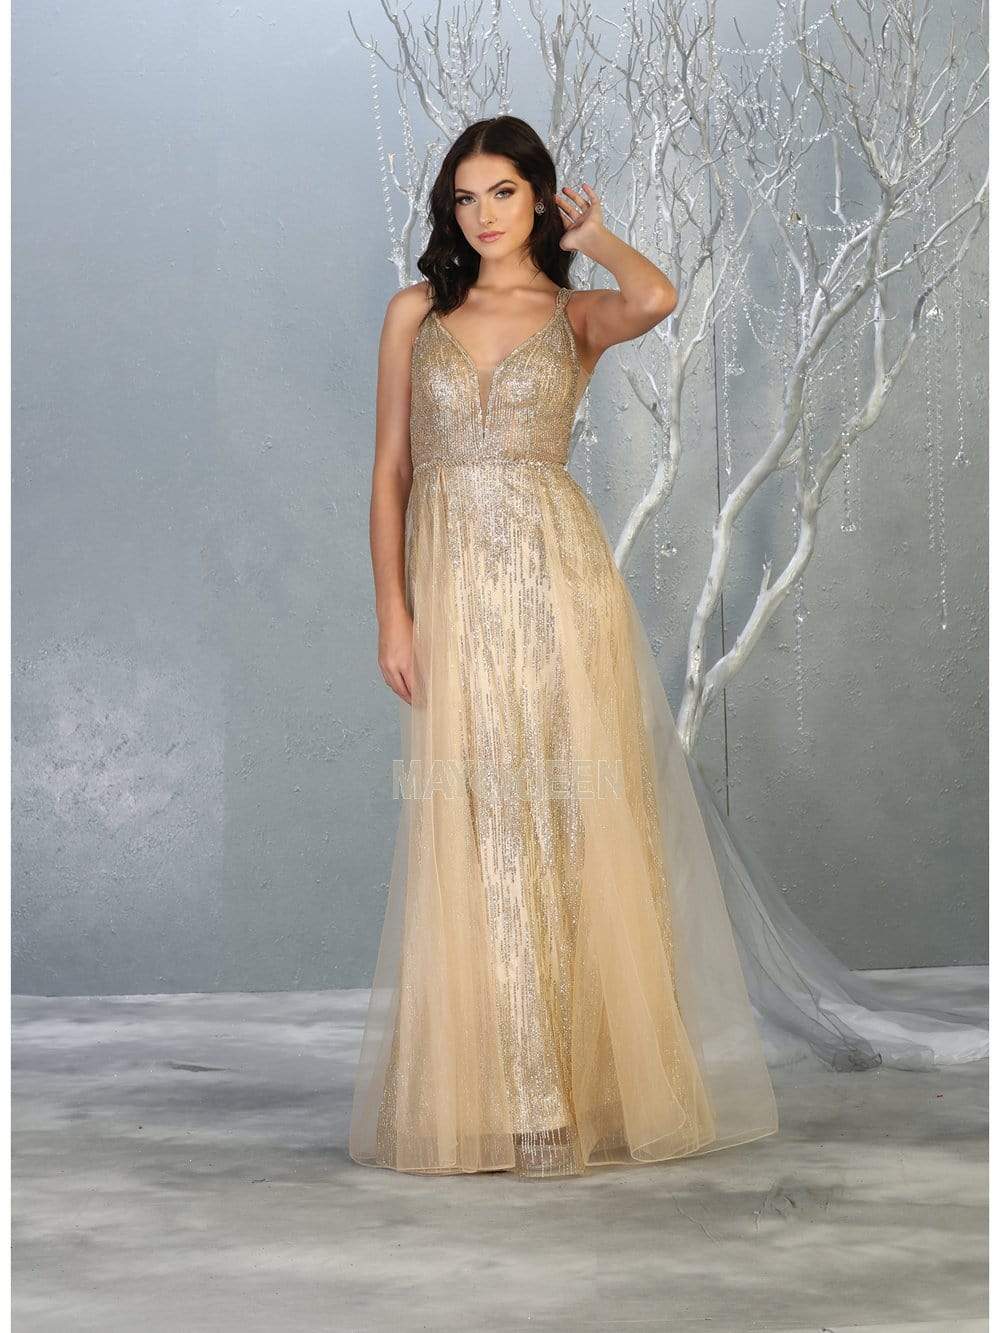 May Queen - MQ1735 Embellished Deep V-neck A-line Dress Prom Dresses 4 / Gold